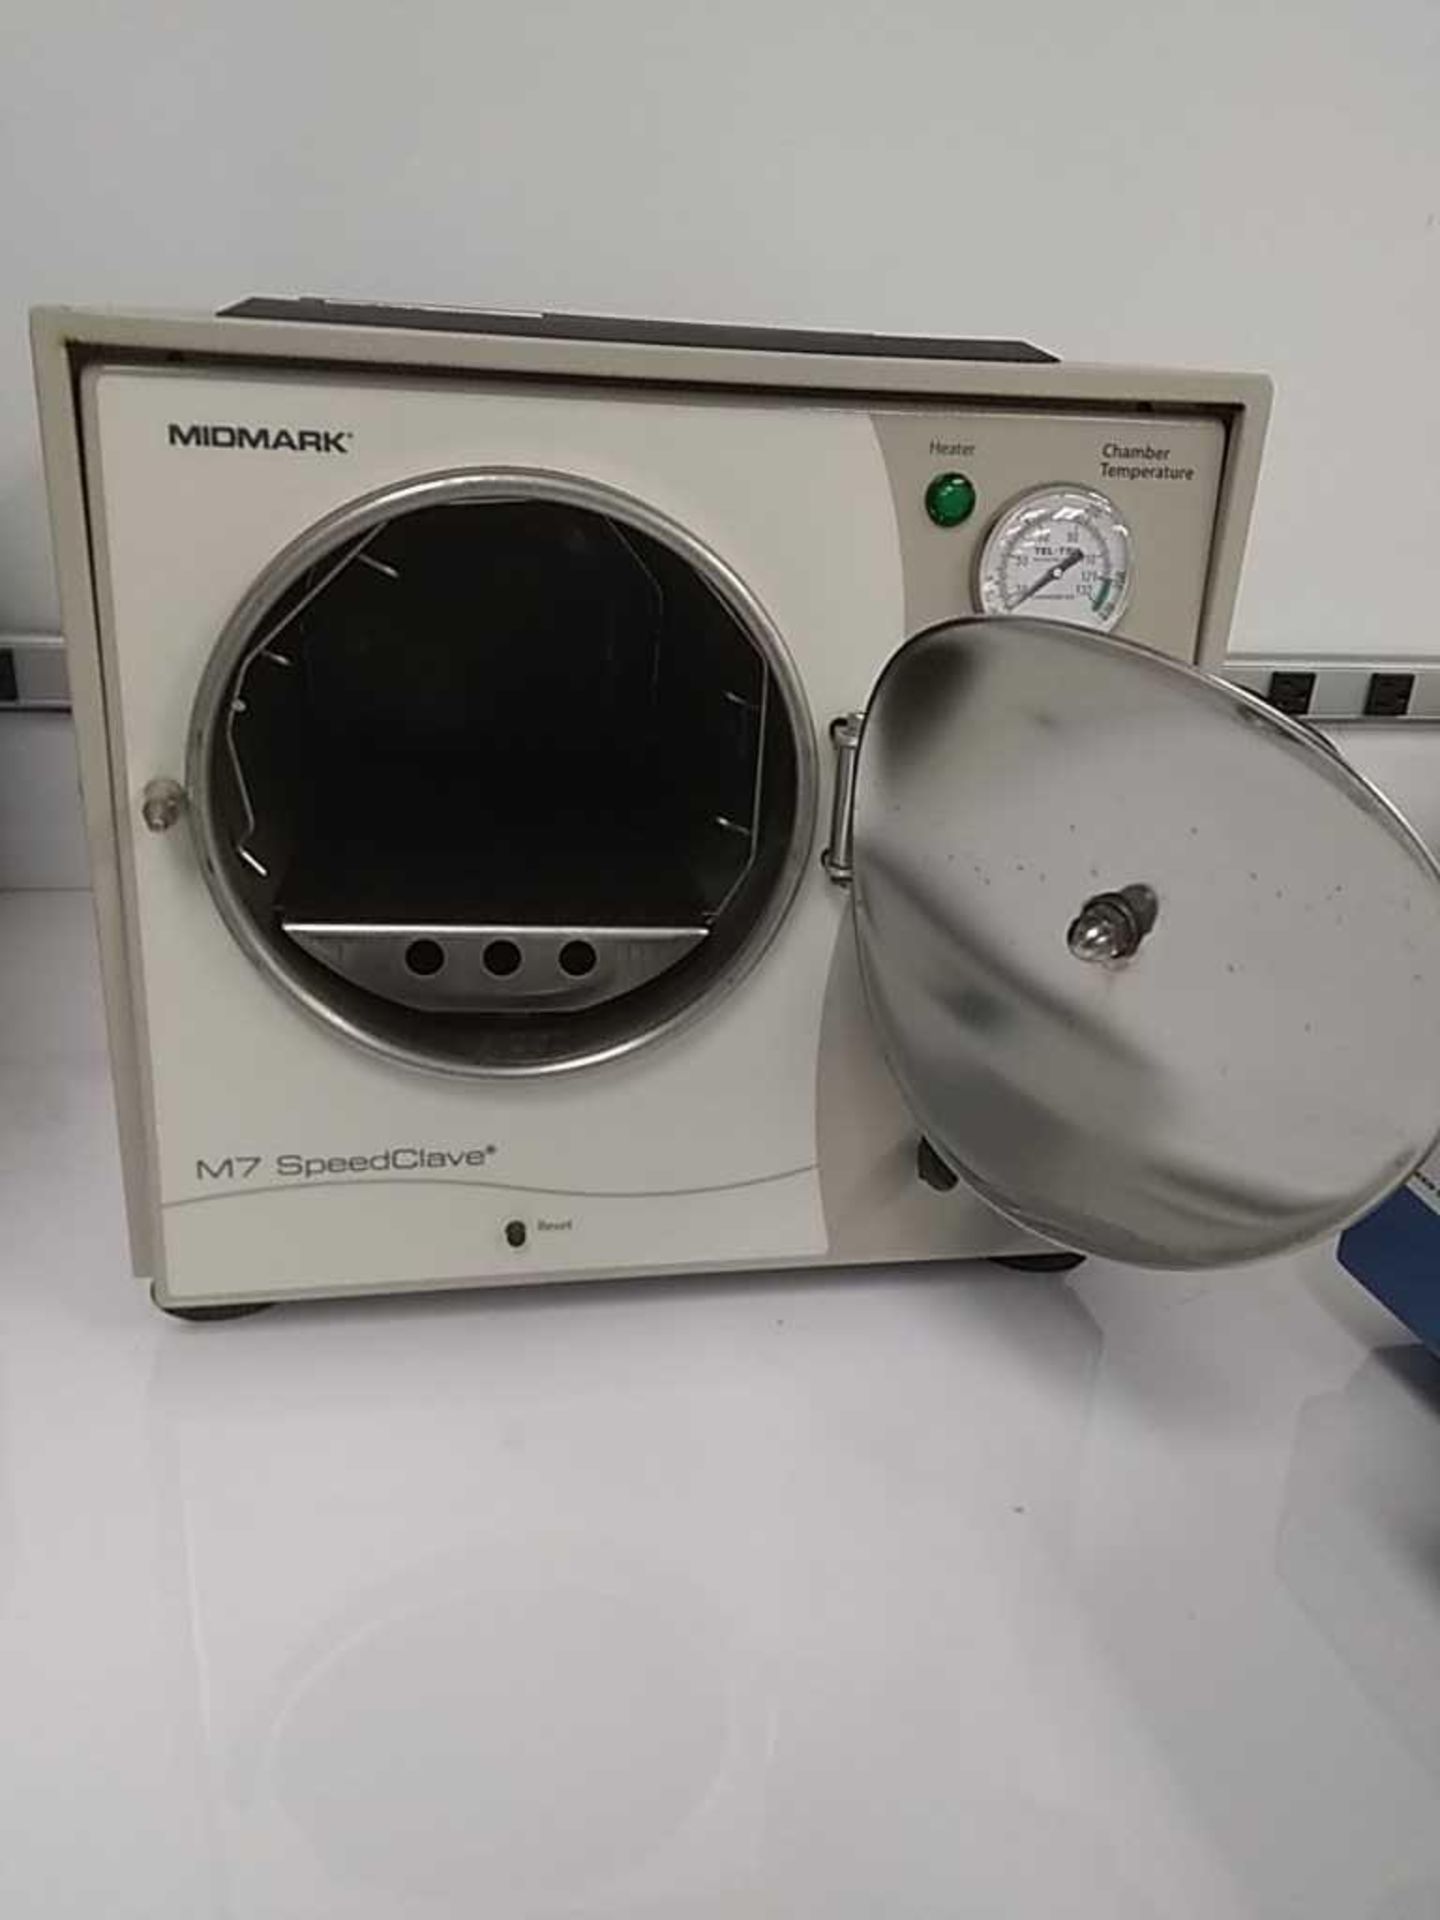 Midmark Model M7 SpeedClave Benchtop Autoclave - Image 4 of 6